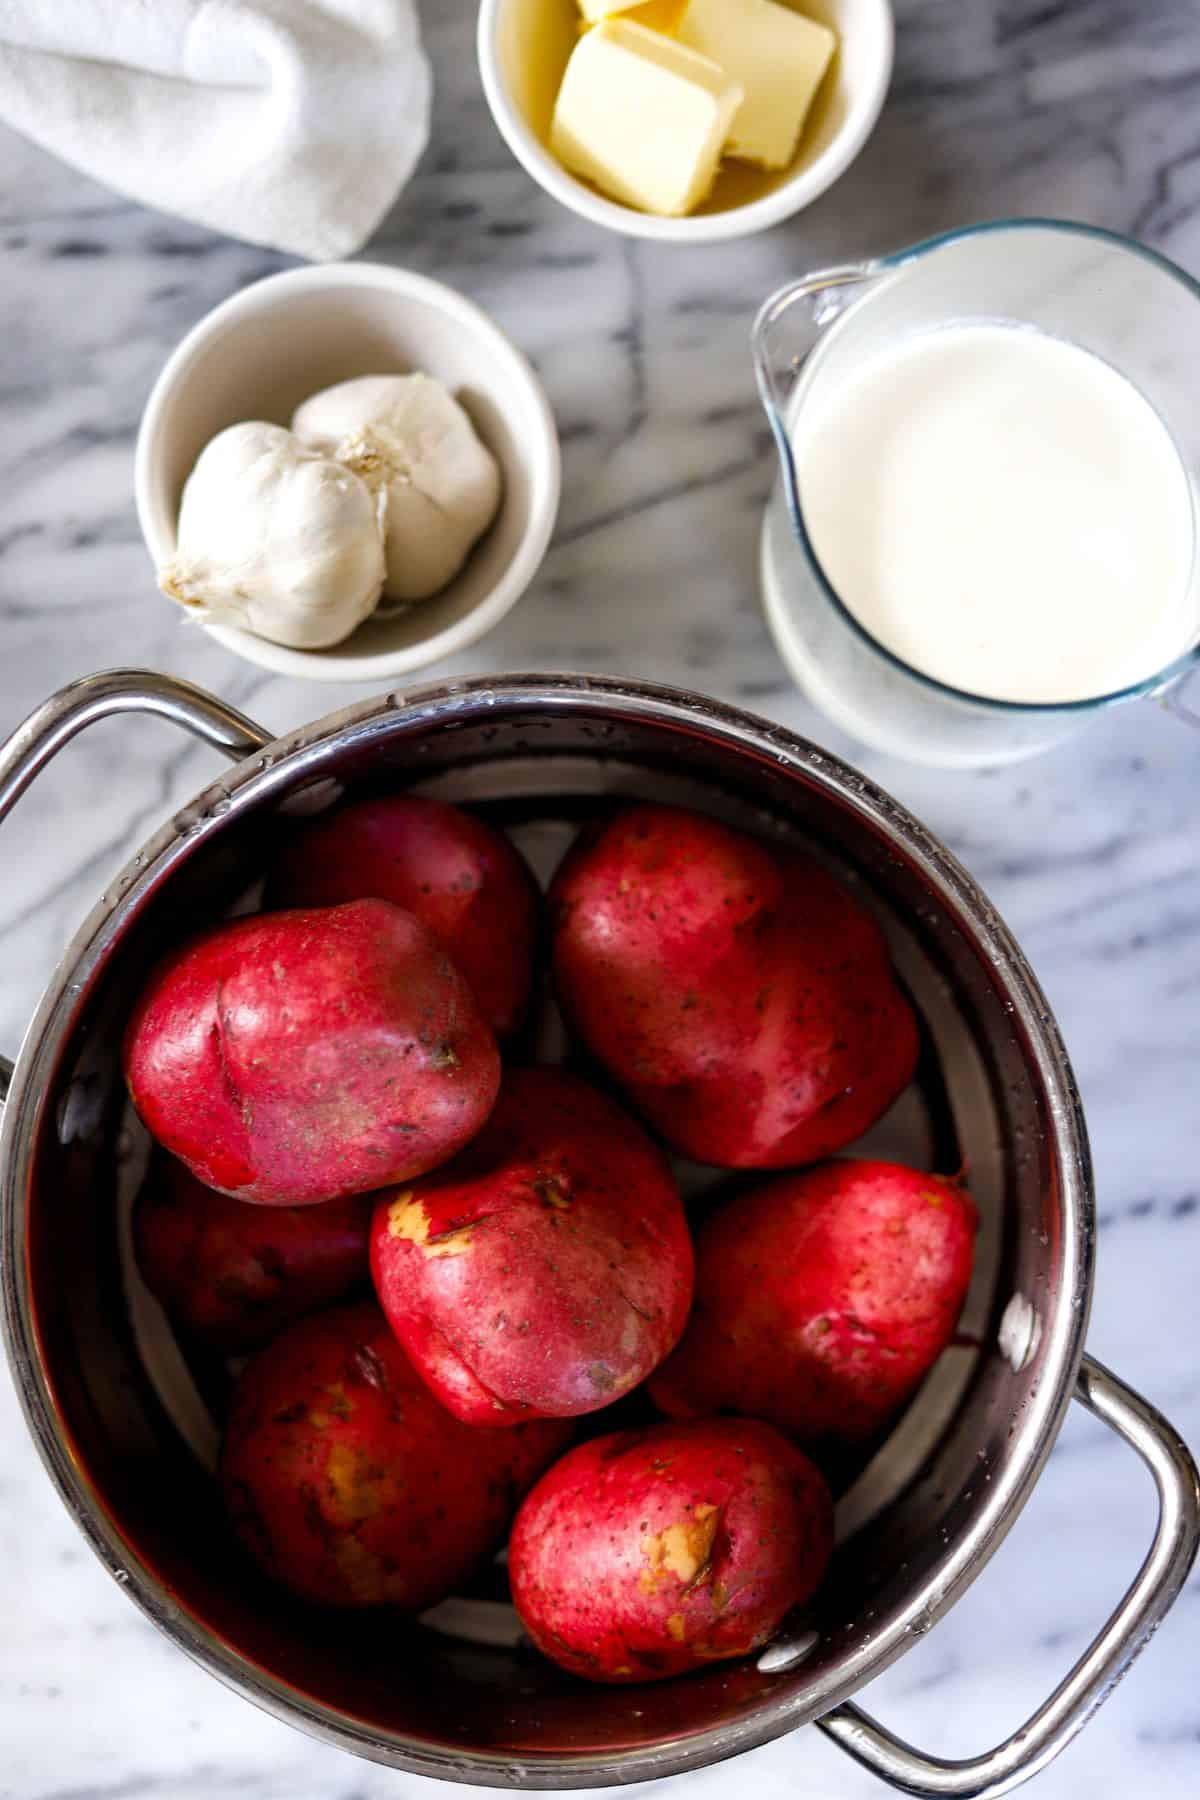 ingredients for mashed potatoes with red skin - cubes of butter, 2 heads of garlic, heavy cream and red skinned potatoes.